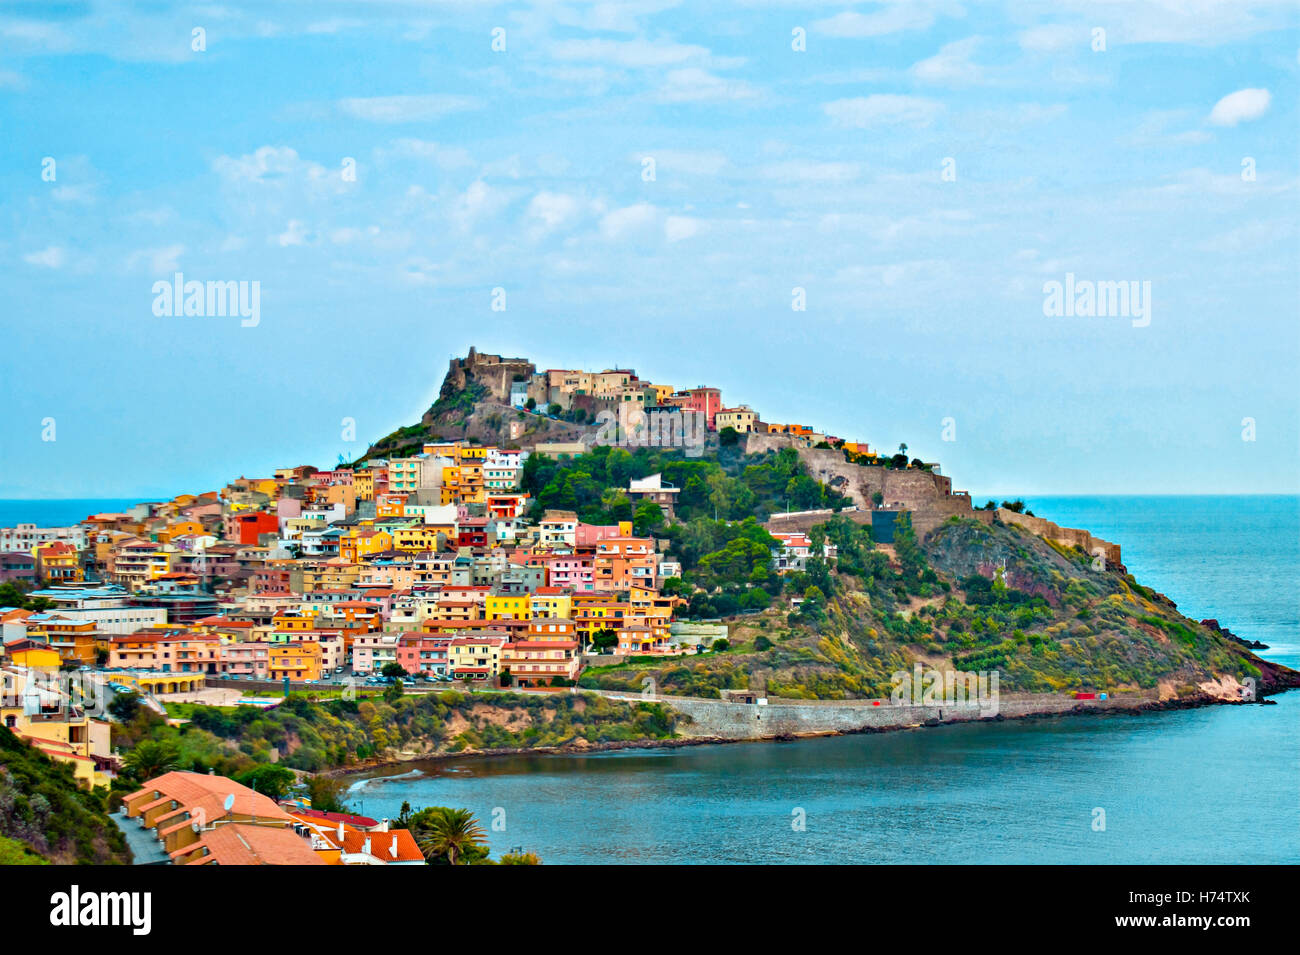 The old Castelsardo is located on the scenic hill, Sardinia, Italy. Stock Photo